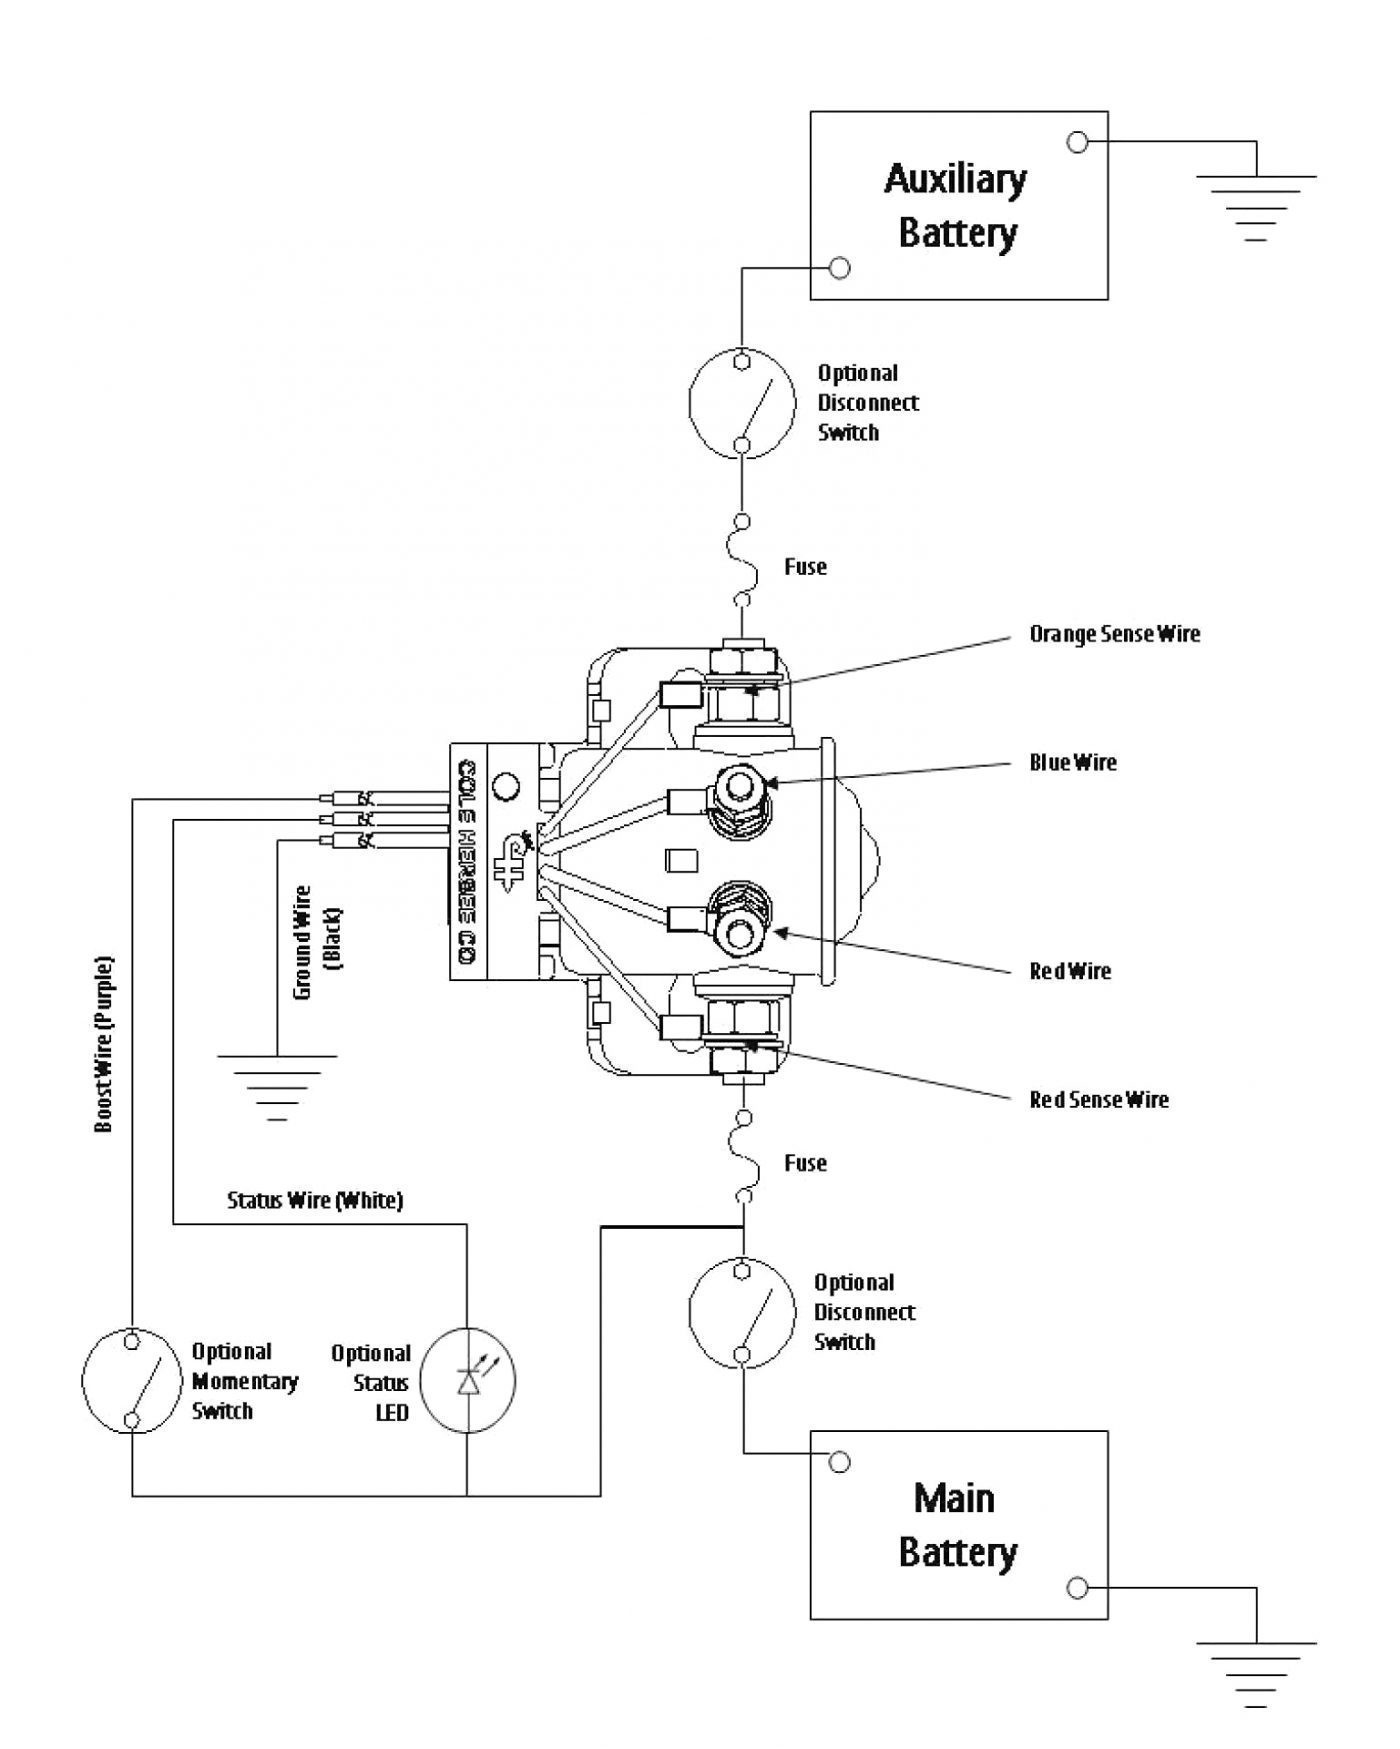 wiring diagram for neutral safety switch rate e36 ignition switch rh zookastar GM Park Neutral